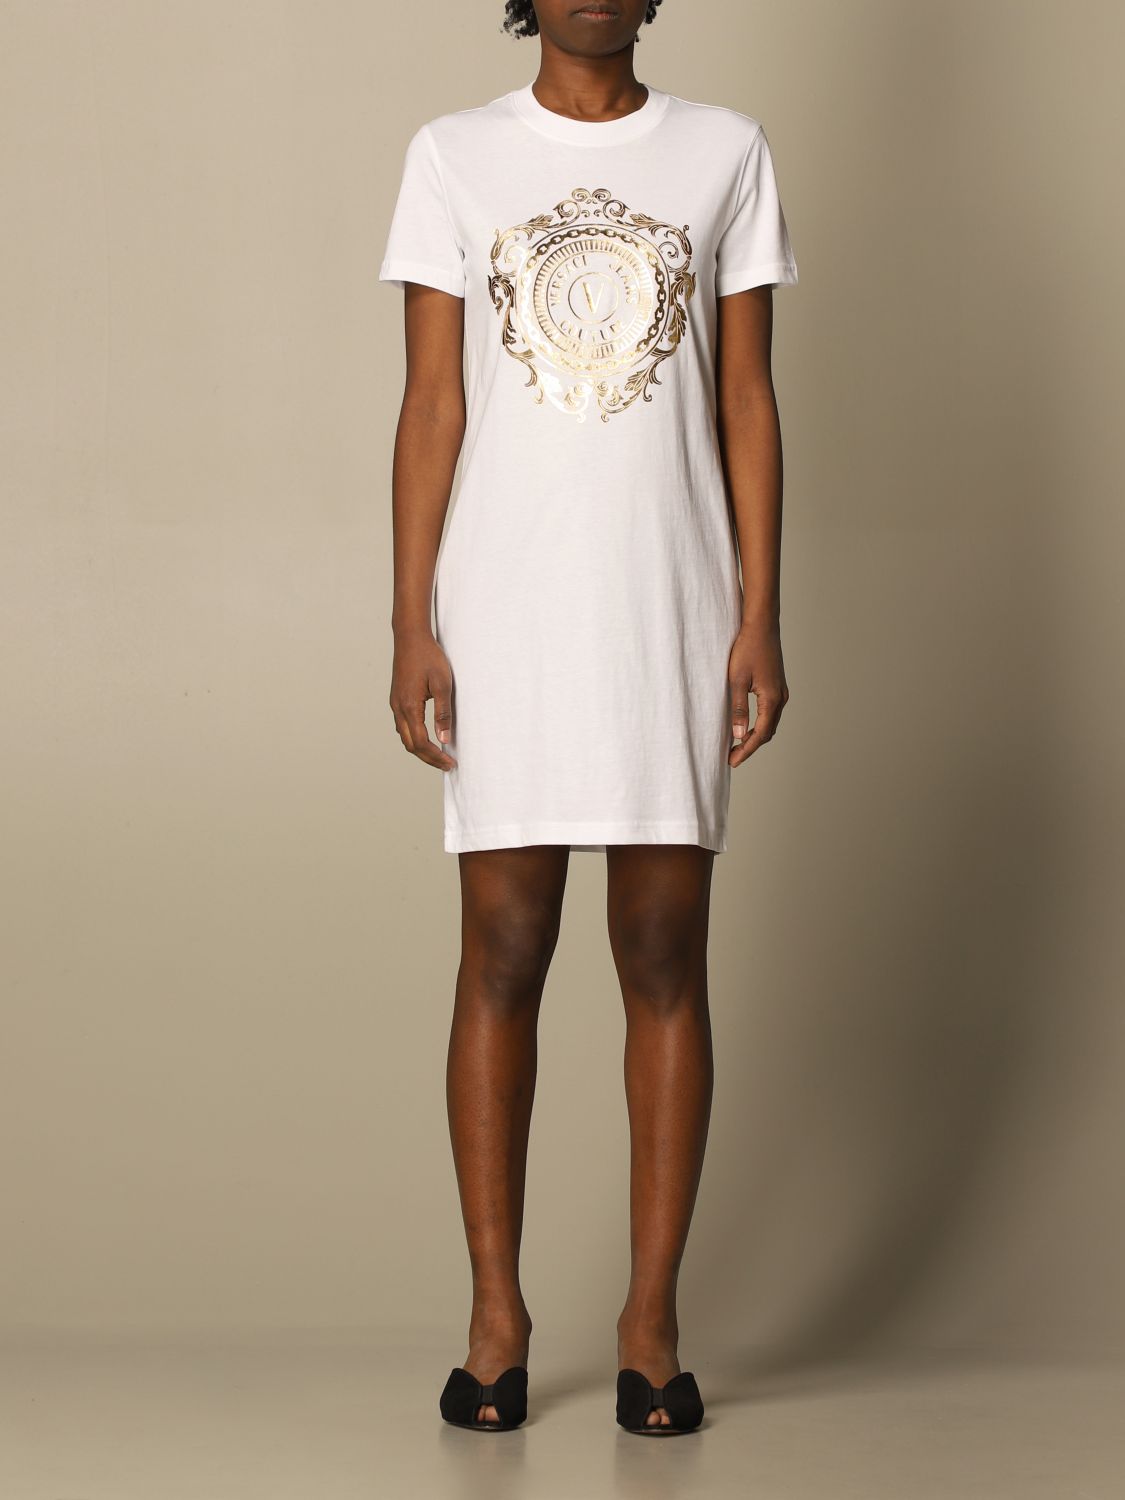 VERSACE JEANS COUTURE: dress for women - White | Versace Jeans Couture ...